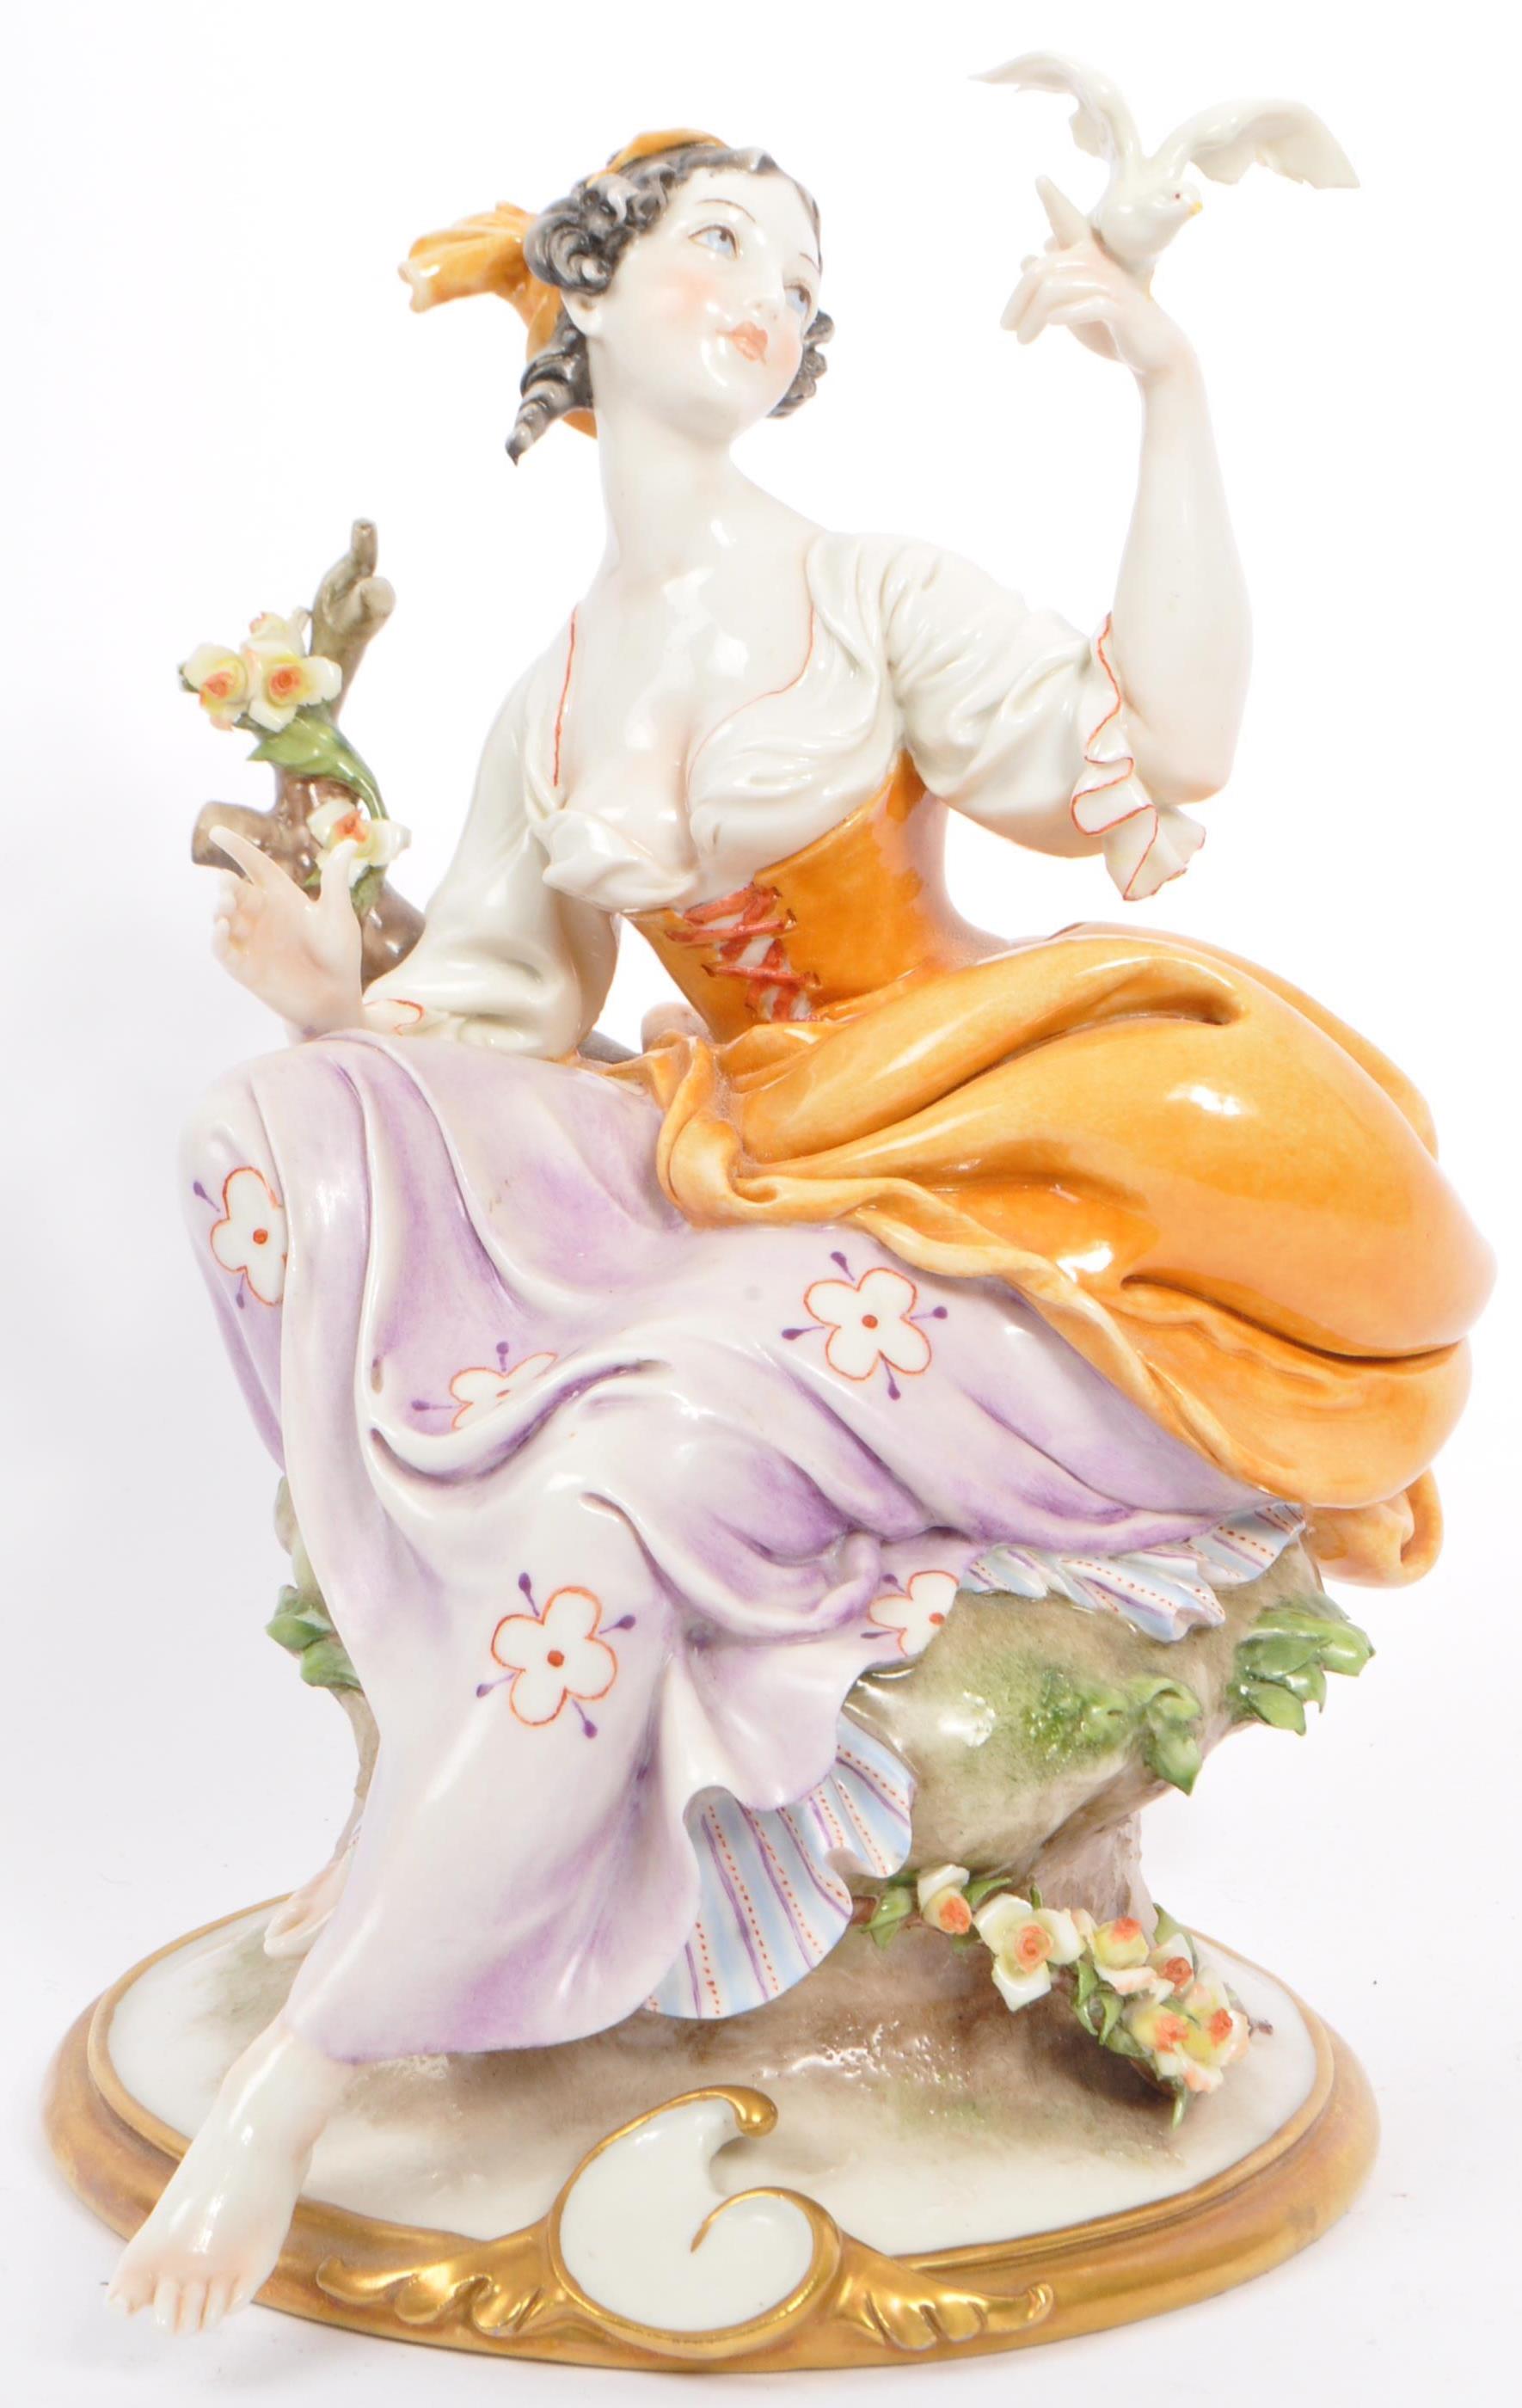 TWO 19TH CENTURY ITALIAN PORCELAIN FIGURES - Image 2 of 8